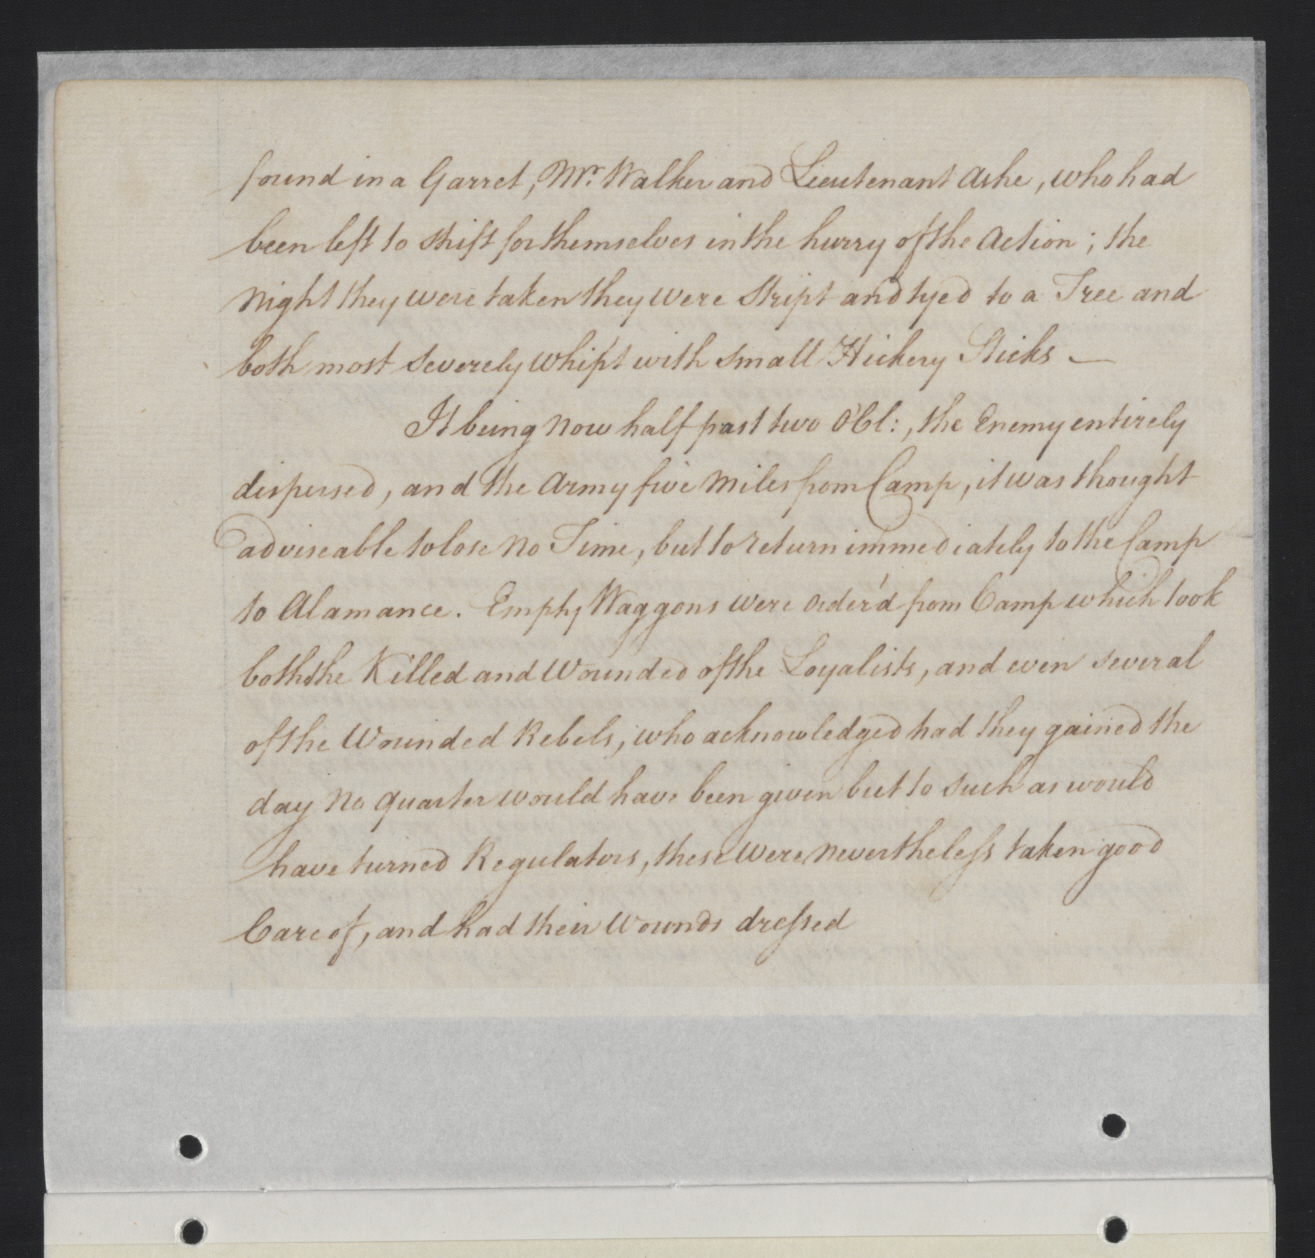 Journal Entry from William Tryon on the Expedition Against the Regulators, 16 May 1771, page 6.